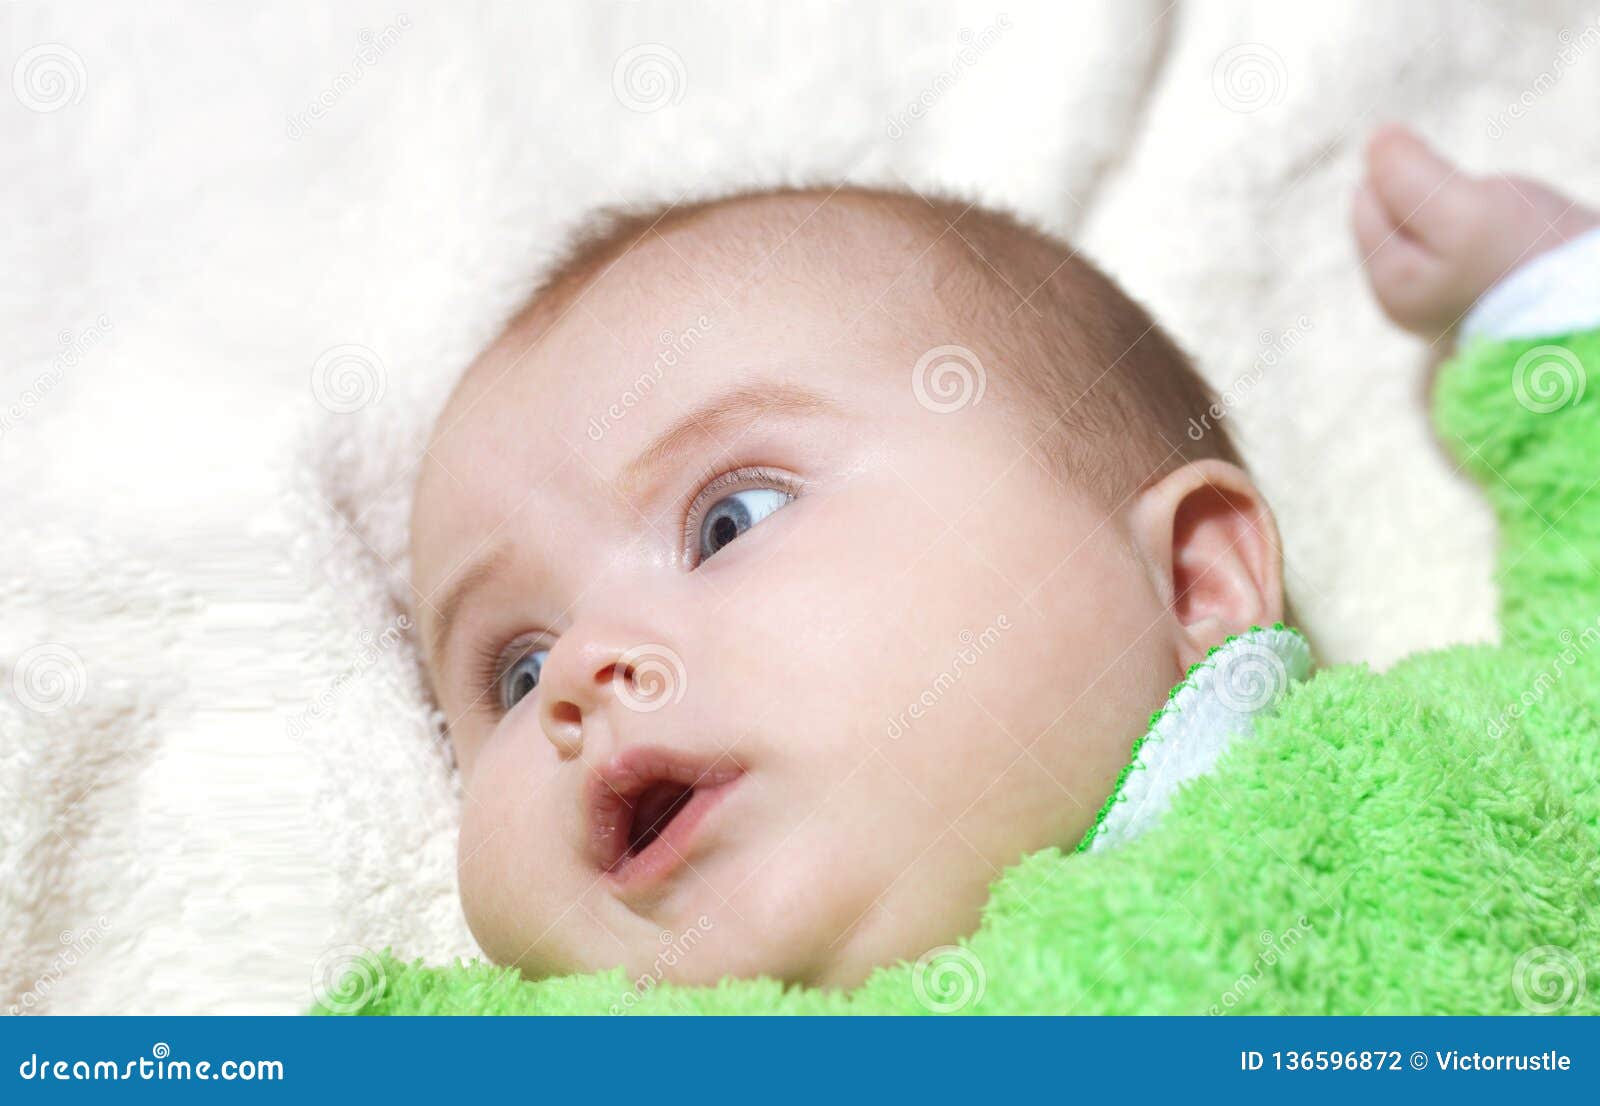 Baby under the blanket stock photo. Image of funny - 34895646